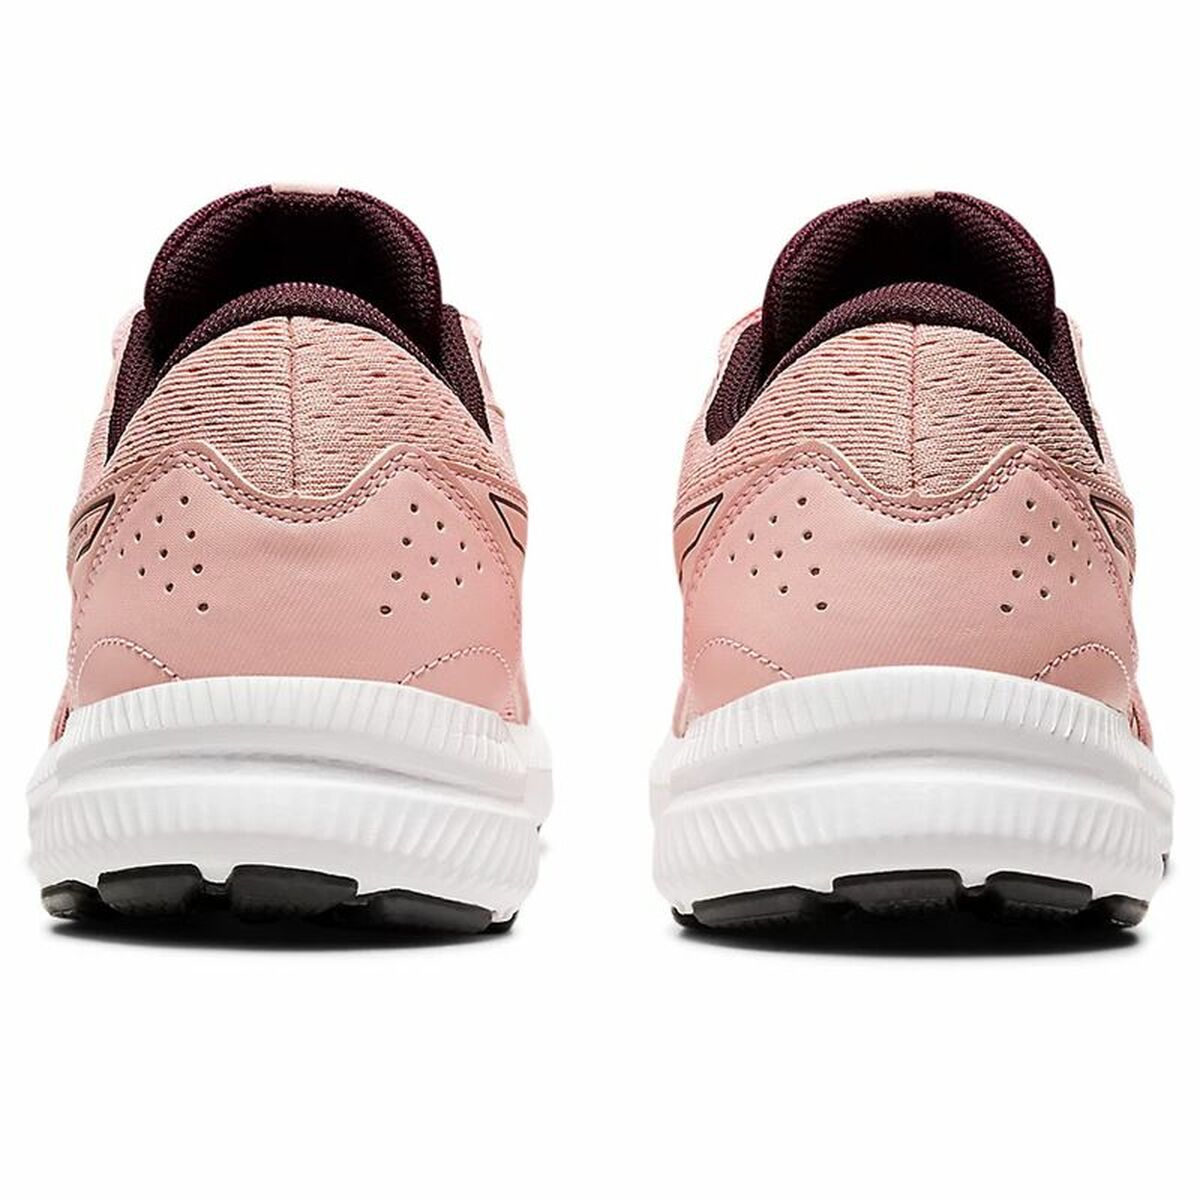 Sports Trainers for Women Asics Gel-Contend 8 Pink